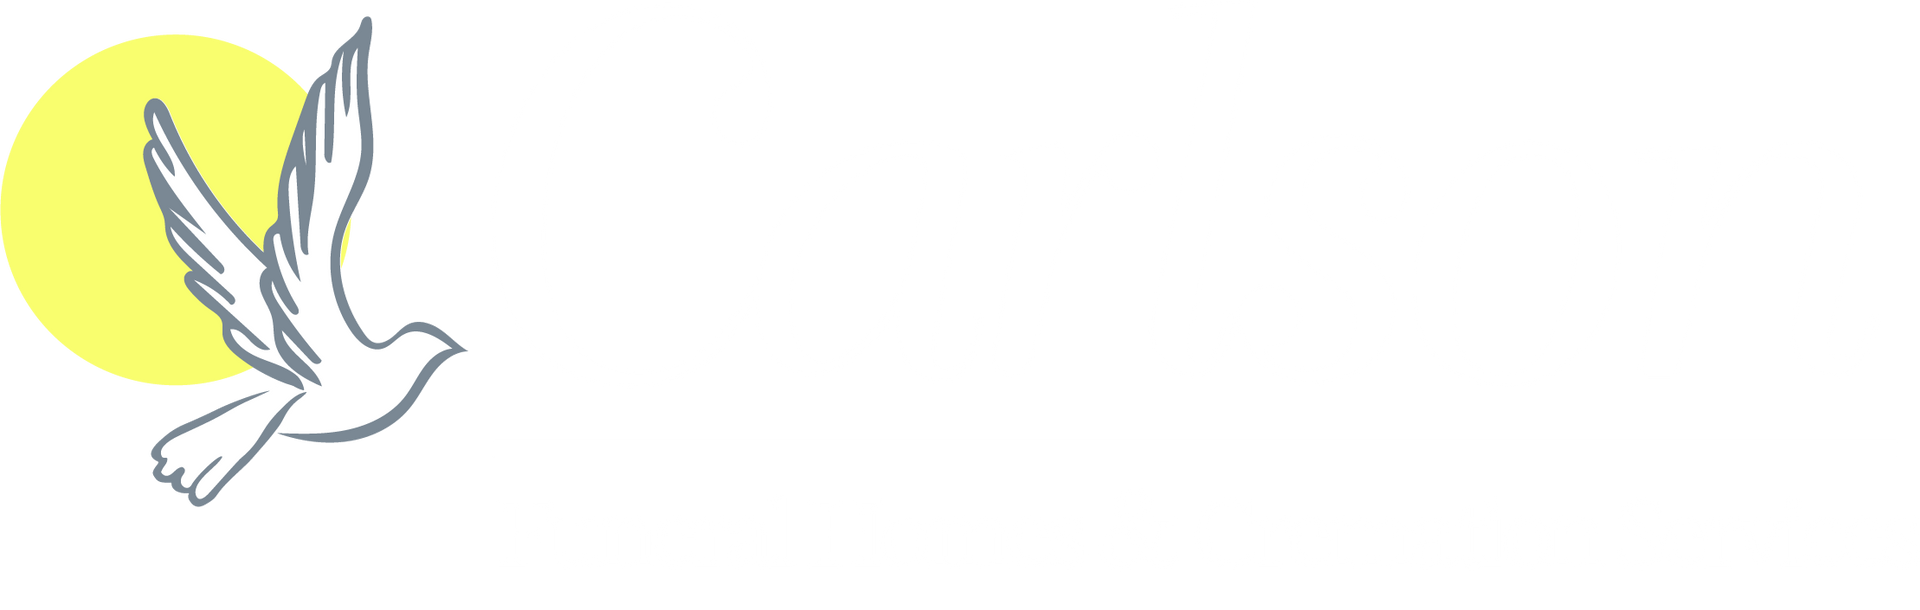 Carlson Funeral Home footer Logo